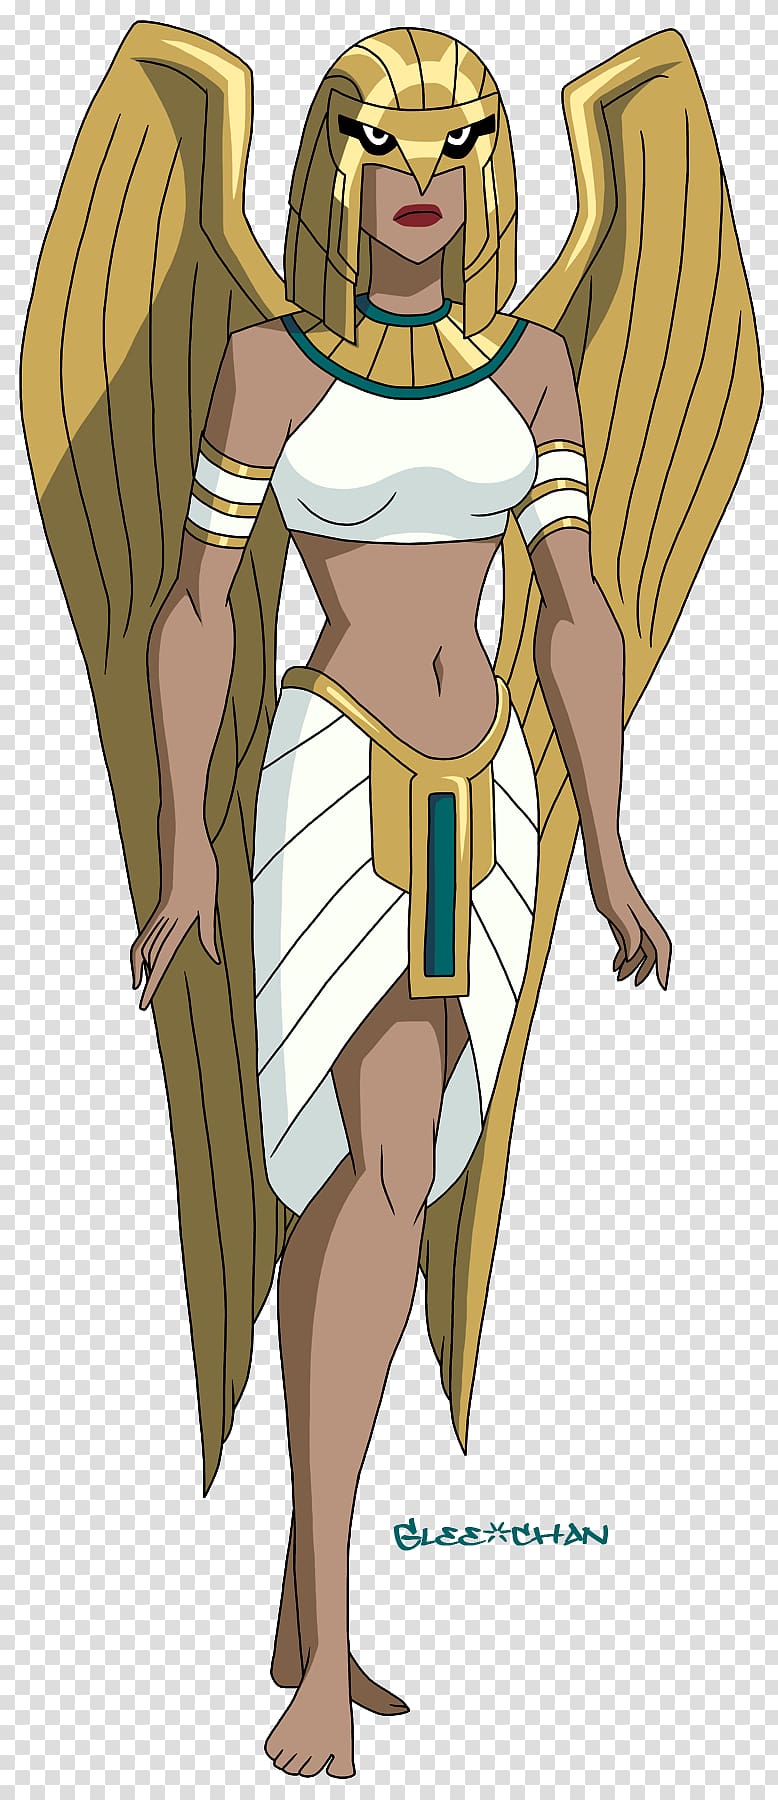 Hawkgirl Cartoon DC animated universe Thanagar, hawkgirl transparent background PNG clipart